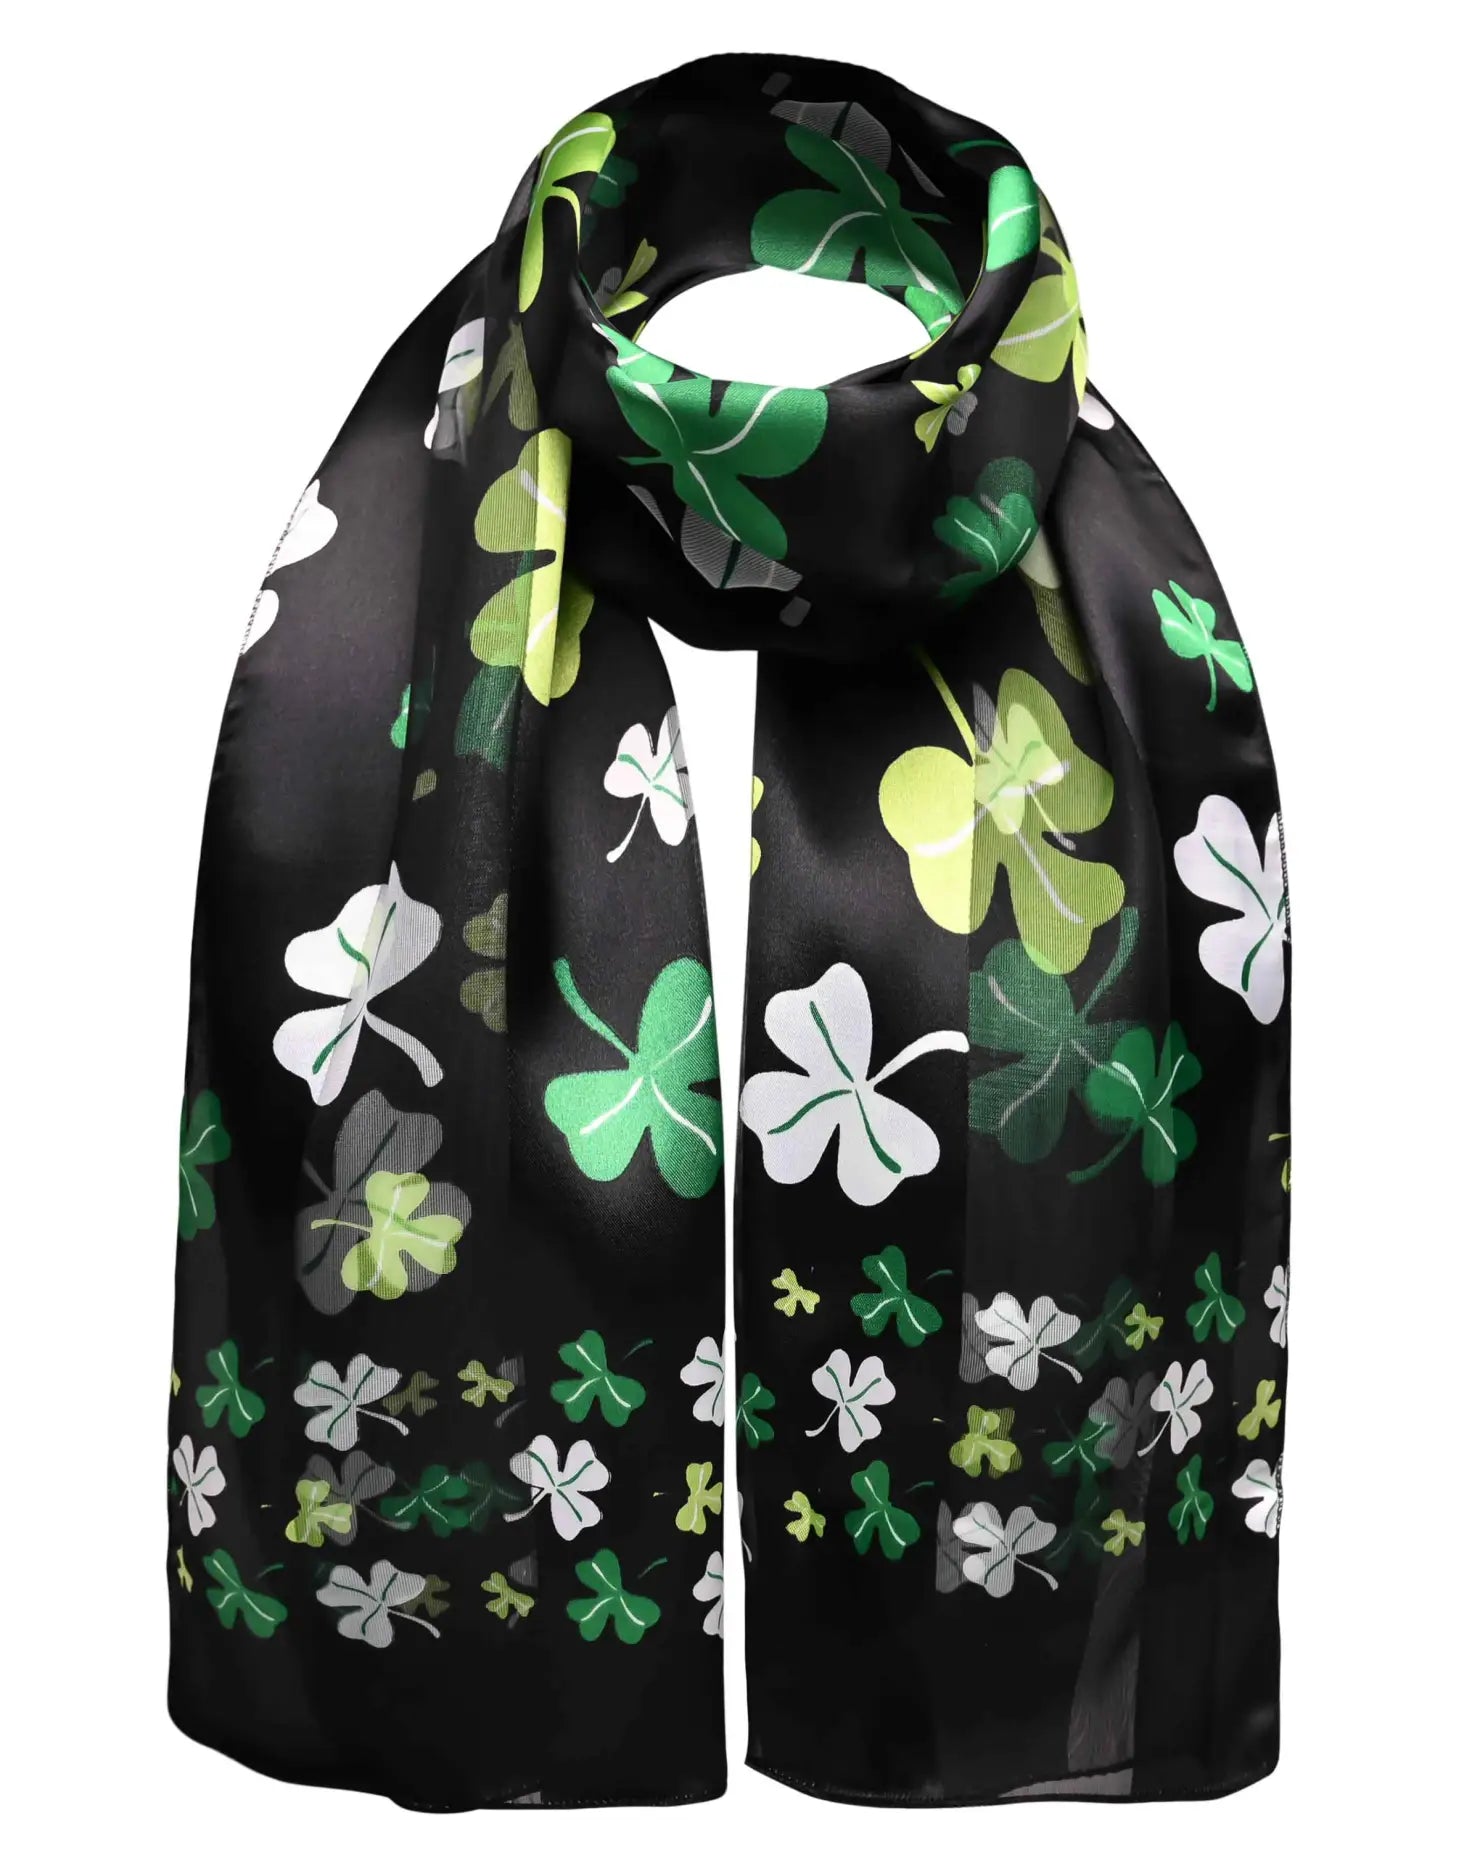 Black satin Celtic Shamrock scarf with green and white shamrocks, perfect for St. Patrick’s Day